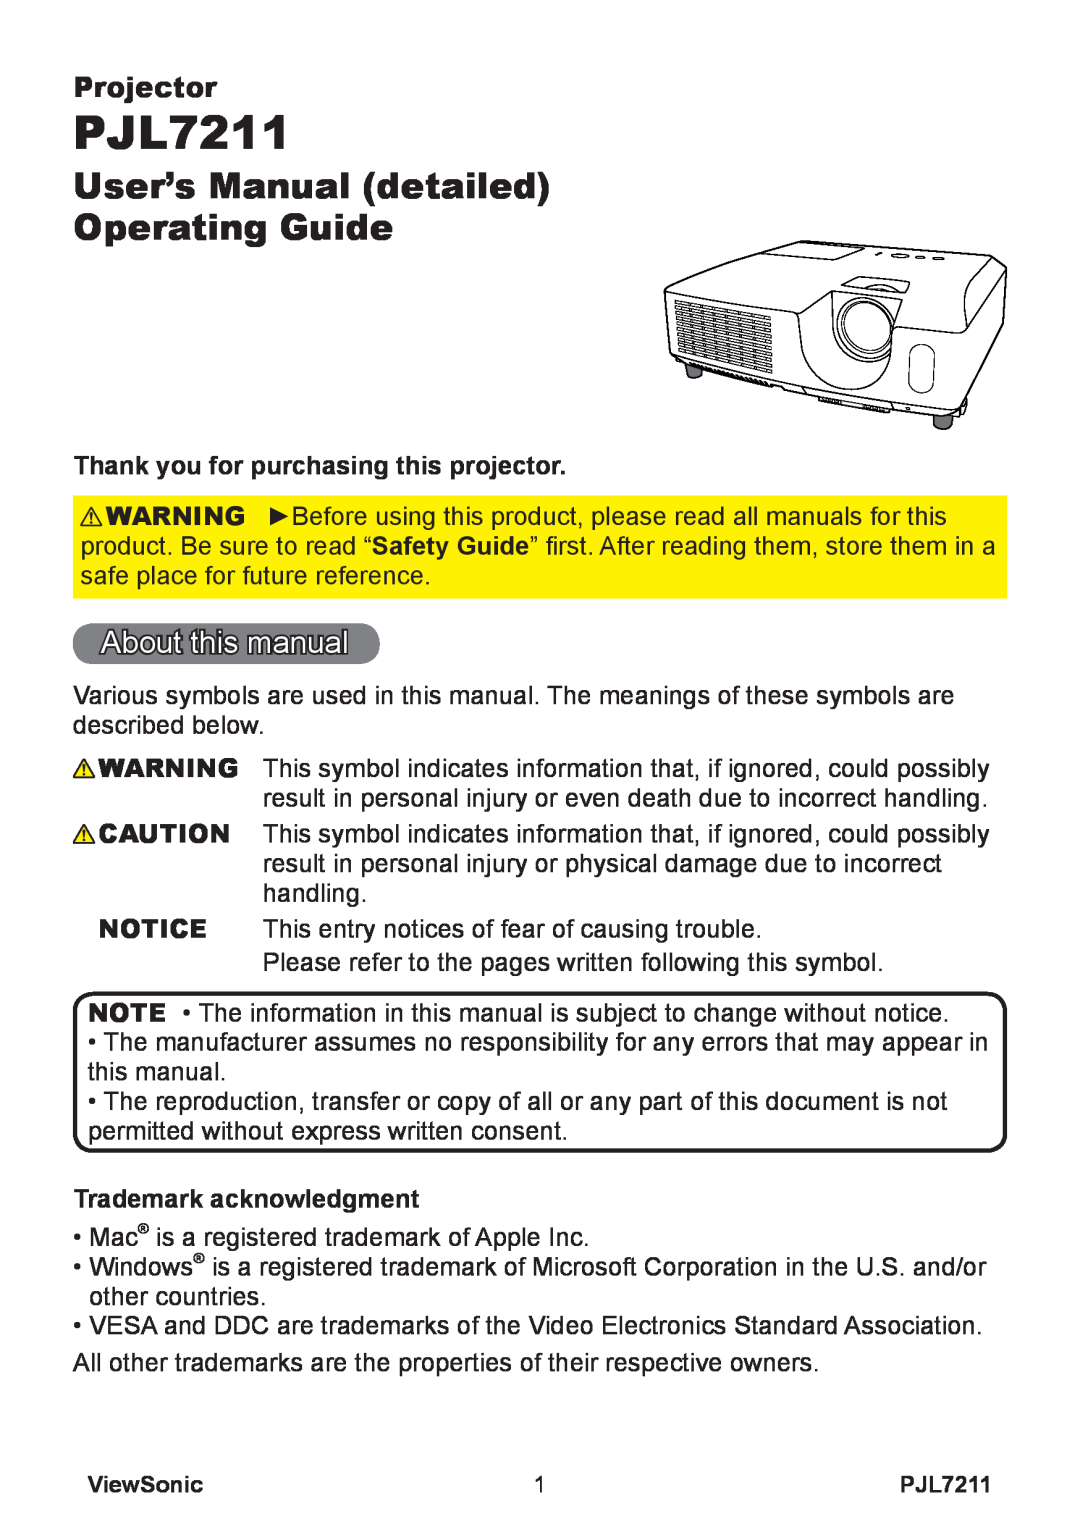 ViewSonic PJL7211 User’s Manual detailed Operating Guide, About this manual, Projector, Trademark acknowledgment 